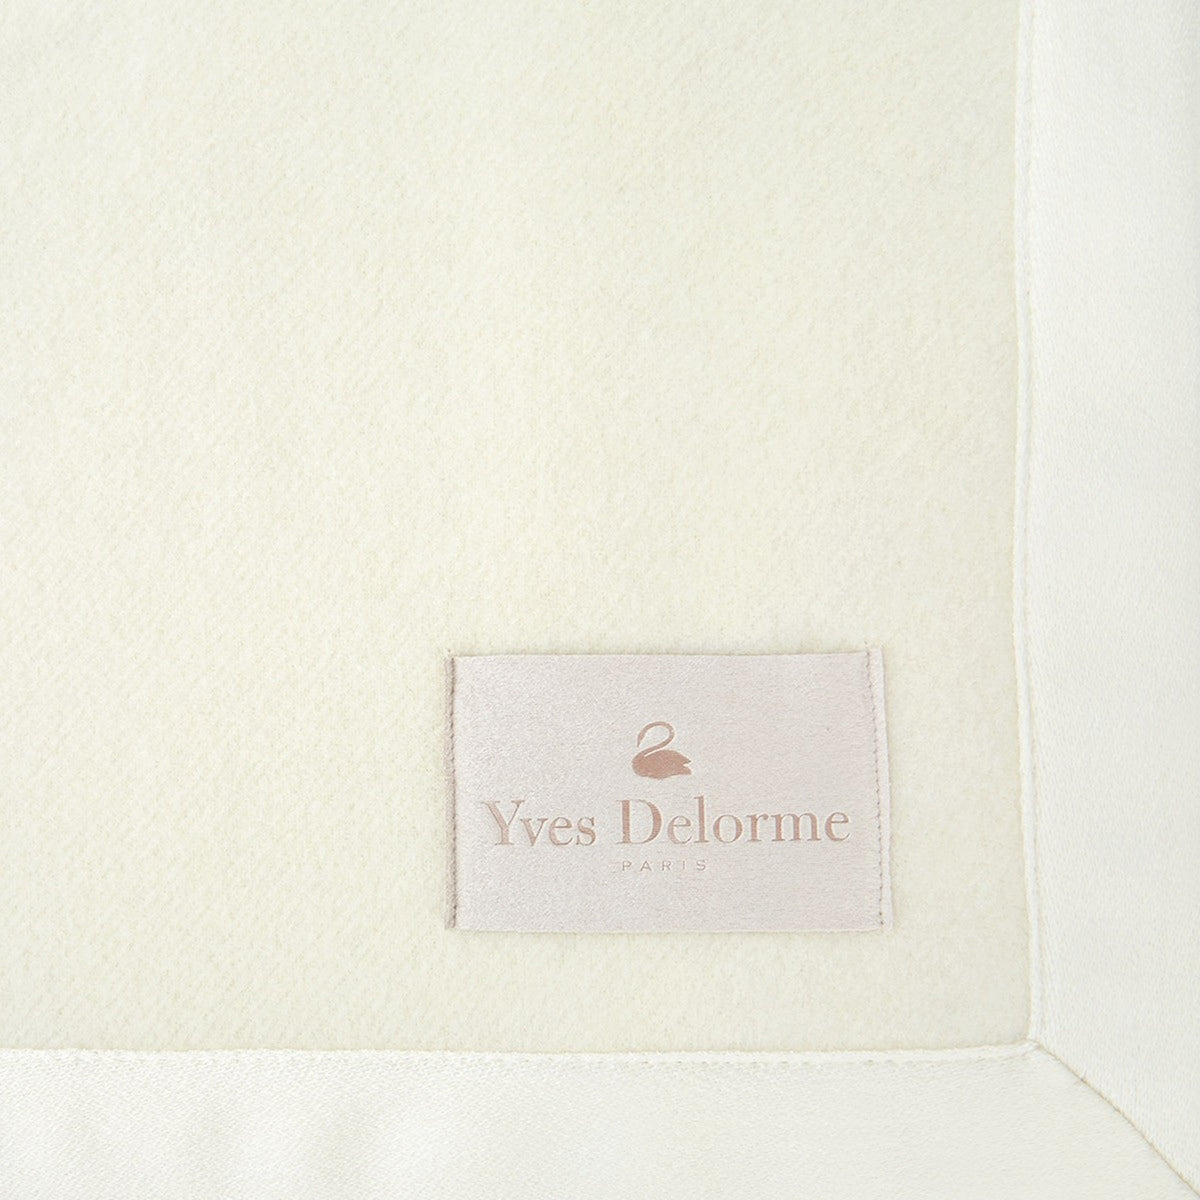 Swatch Sample of Yves Delorme Duchesse Blanket in Nacre Color